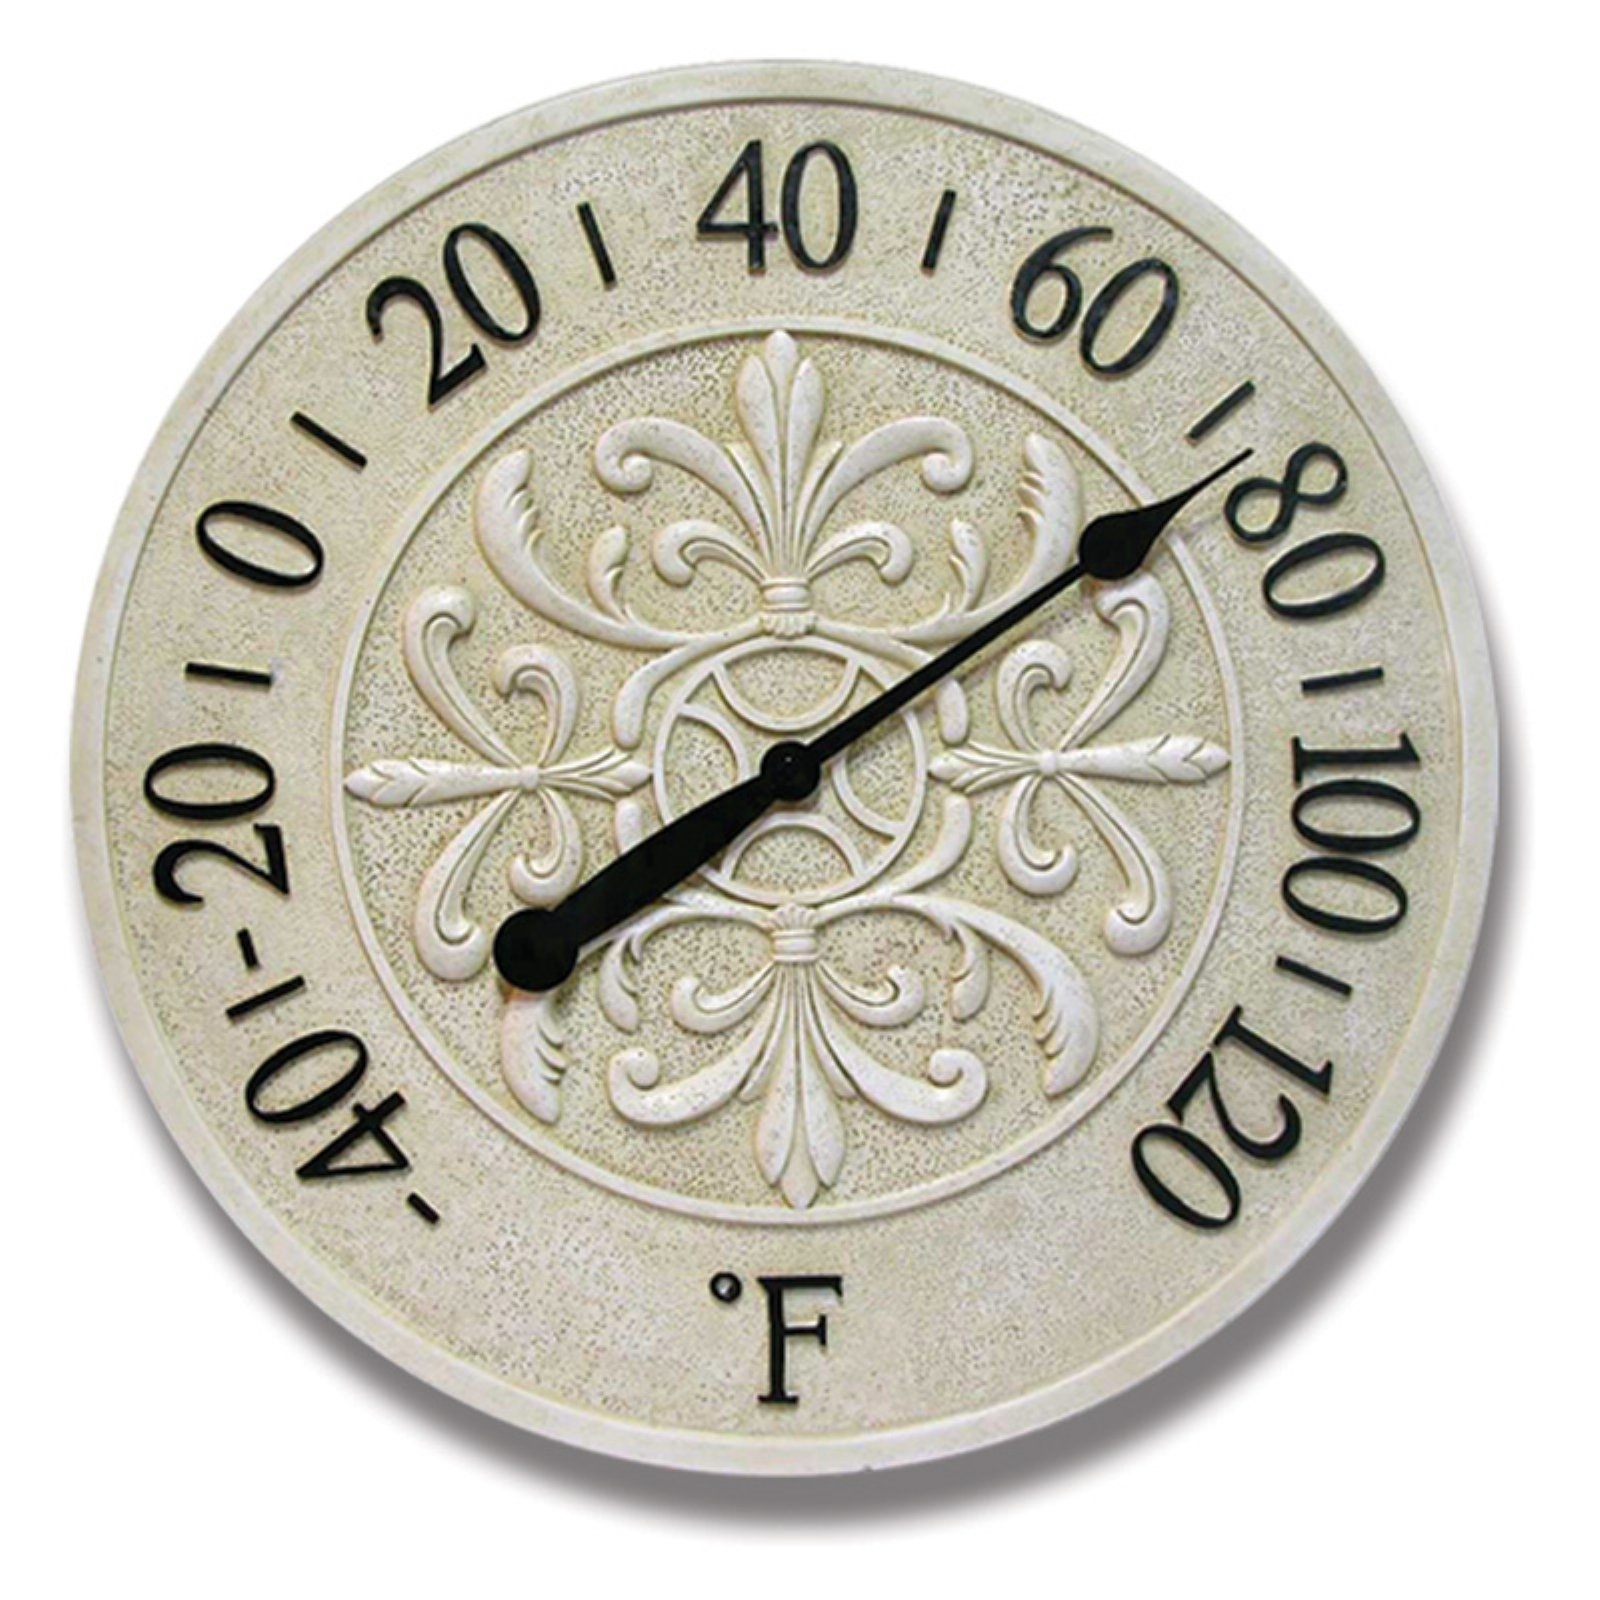 https://foter.com/photos/title/outdoor-thermometer-decorative.jpg